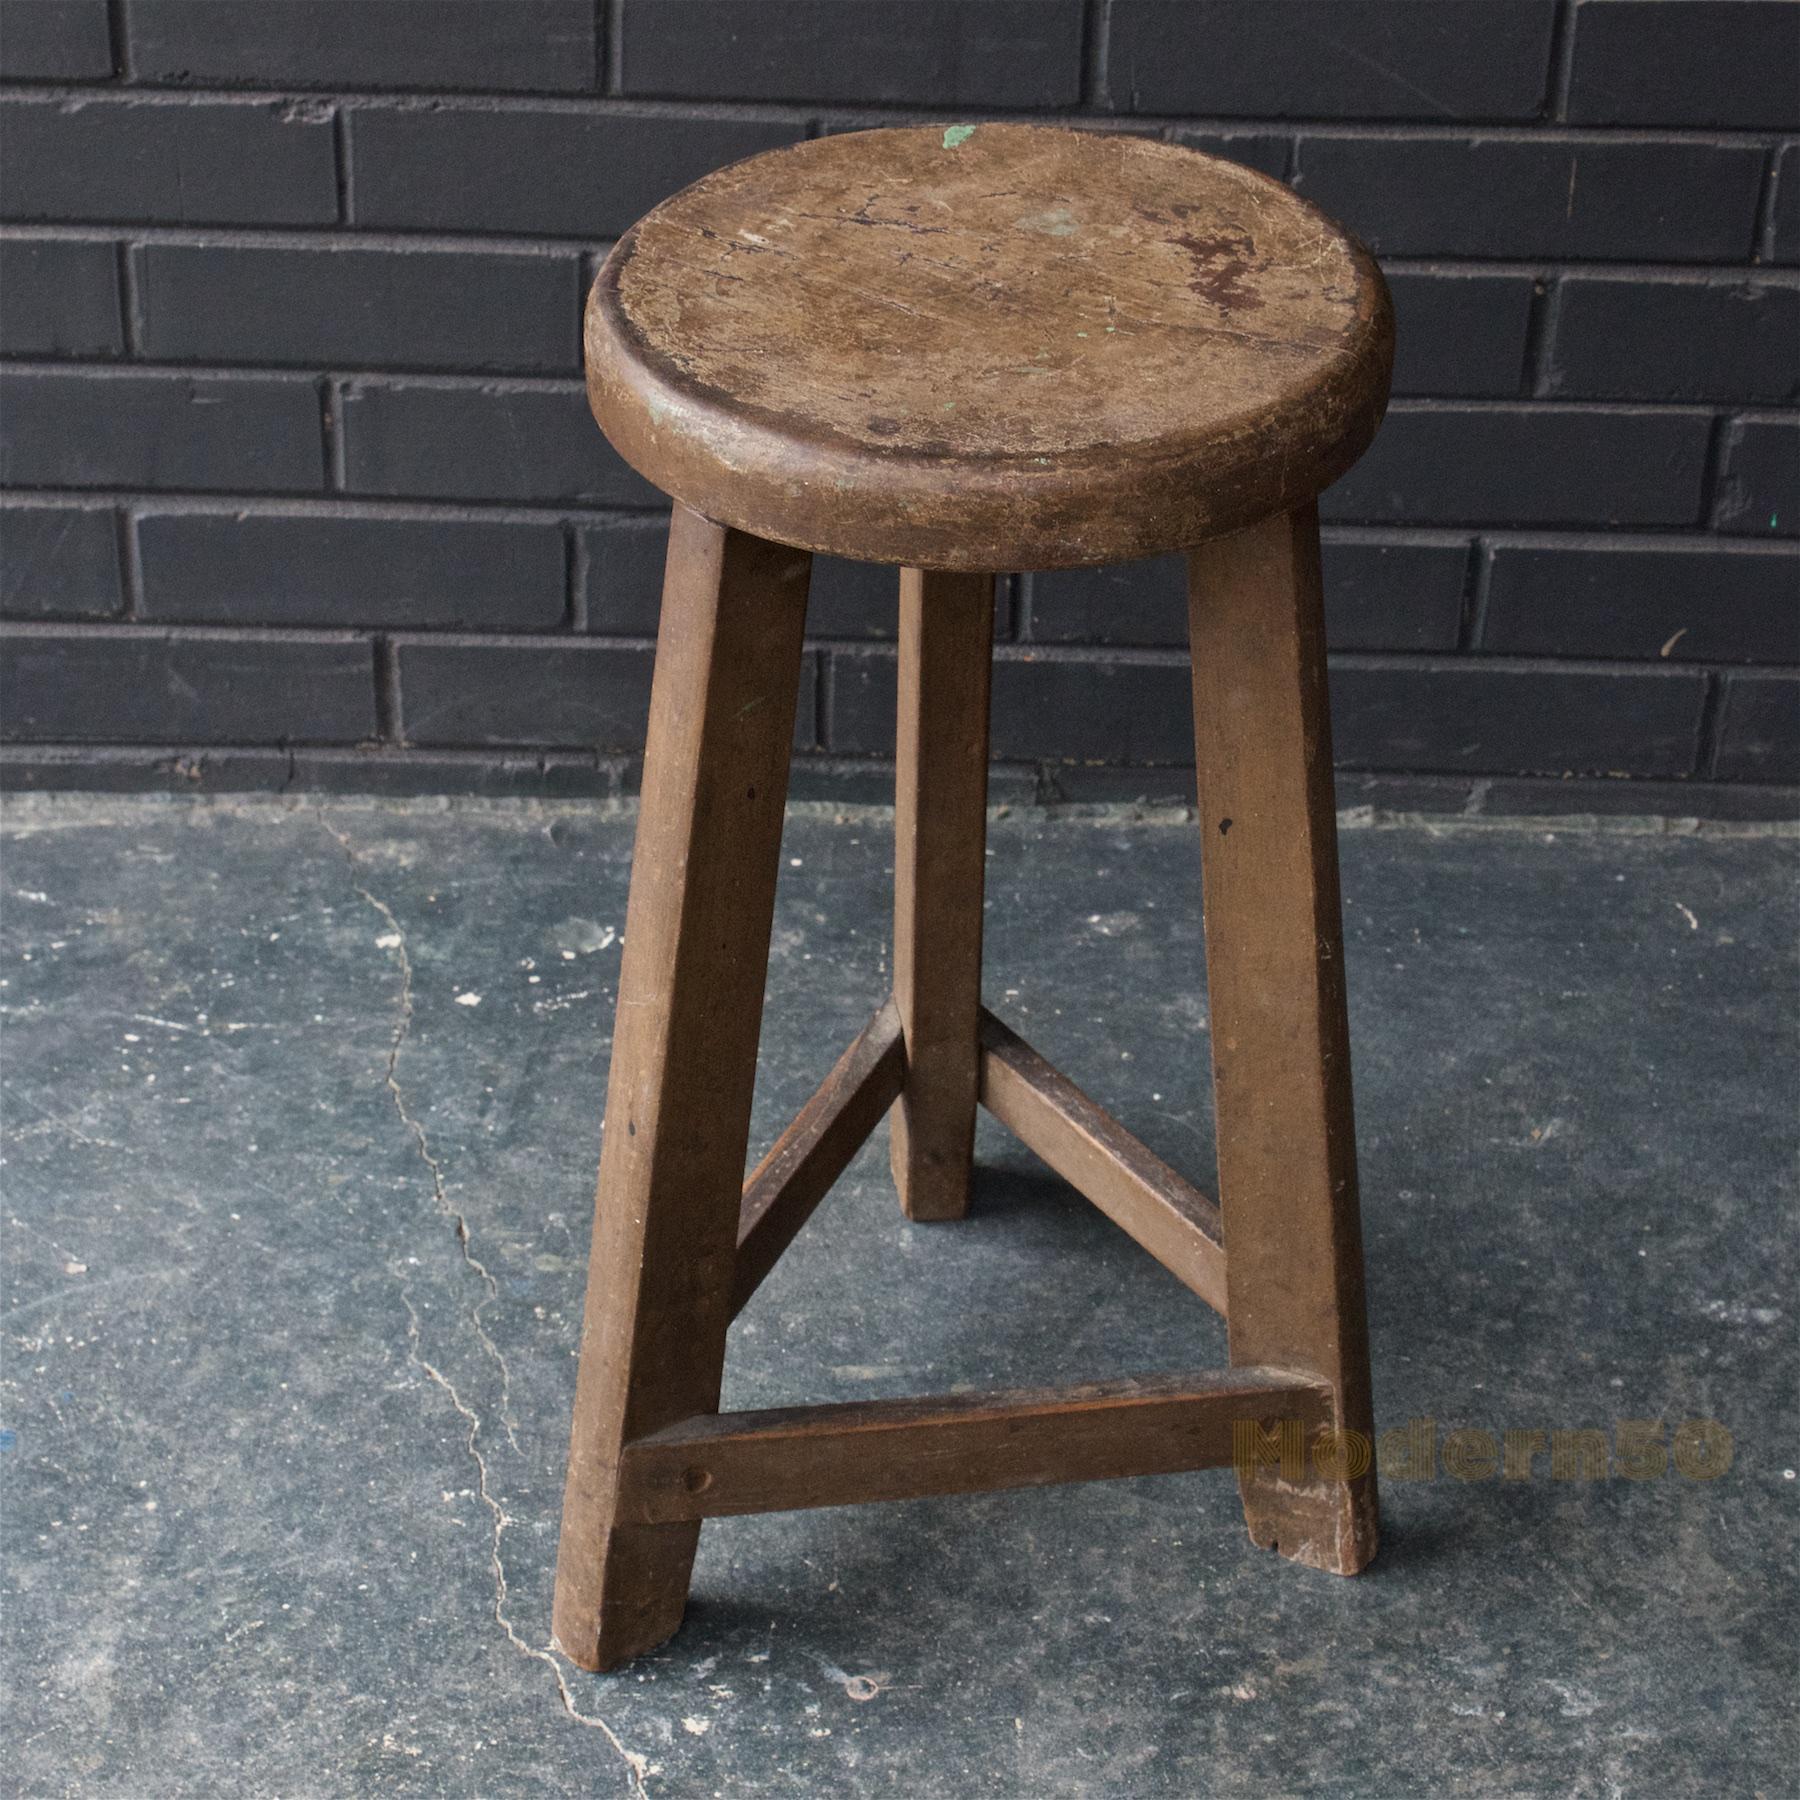 Wonderful and heavy Hardwood, like chestnut stool. Has an Arts and Crafts era feel. Tight Joinery. Original paint and finish. Seat top is 10 1/2 inch in diameter, and the leg splay is about 14 in diameter. Earthy brown color.